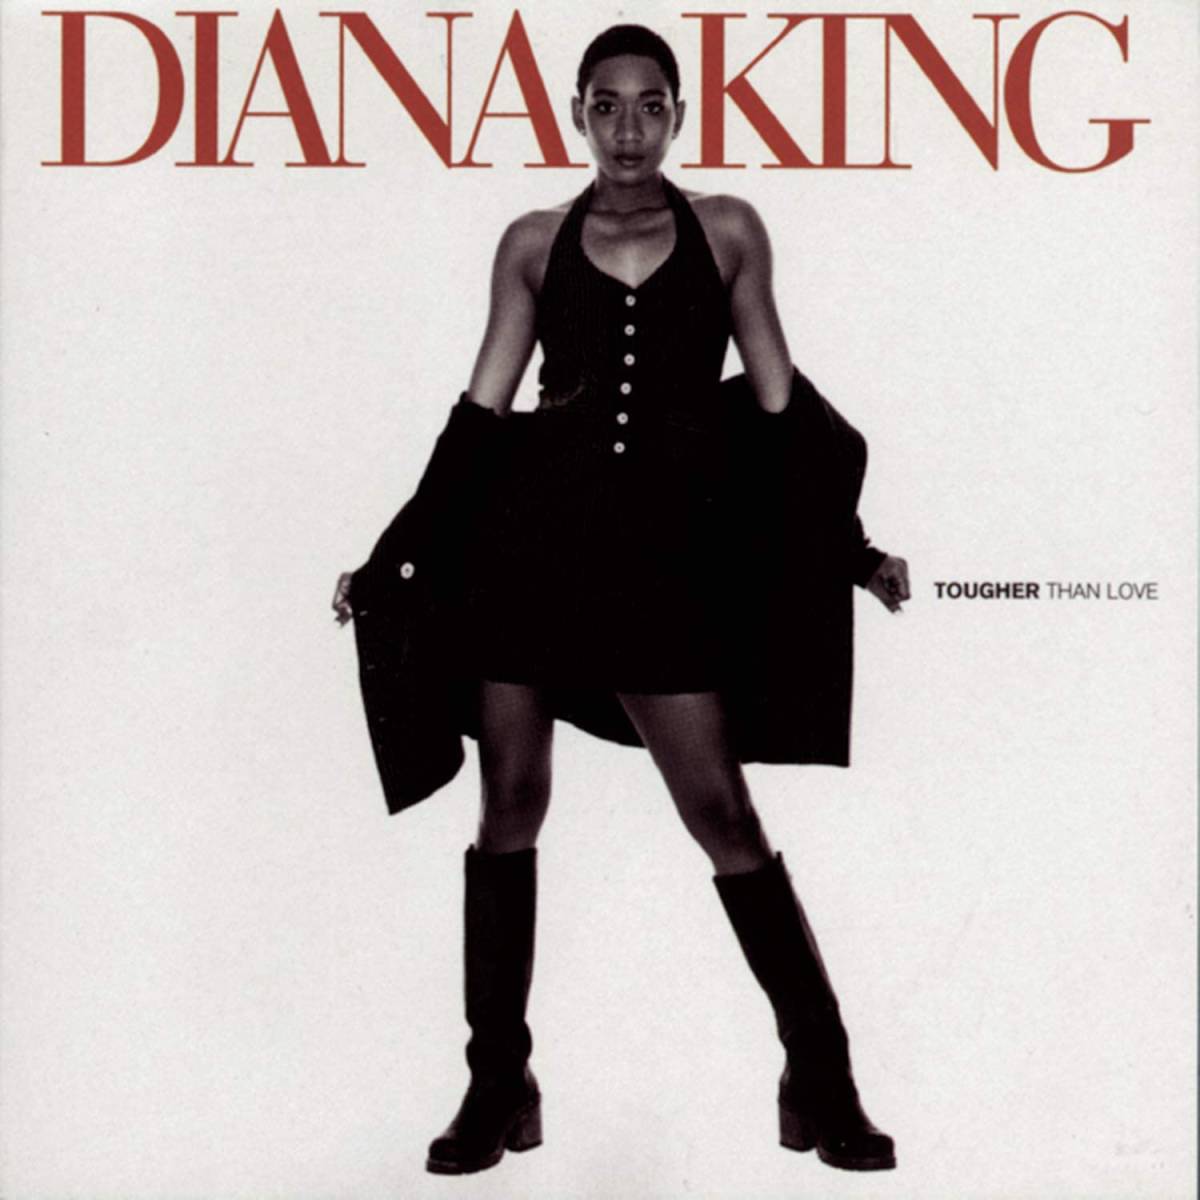 Tougher Than Love Diana * King foreign record CD